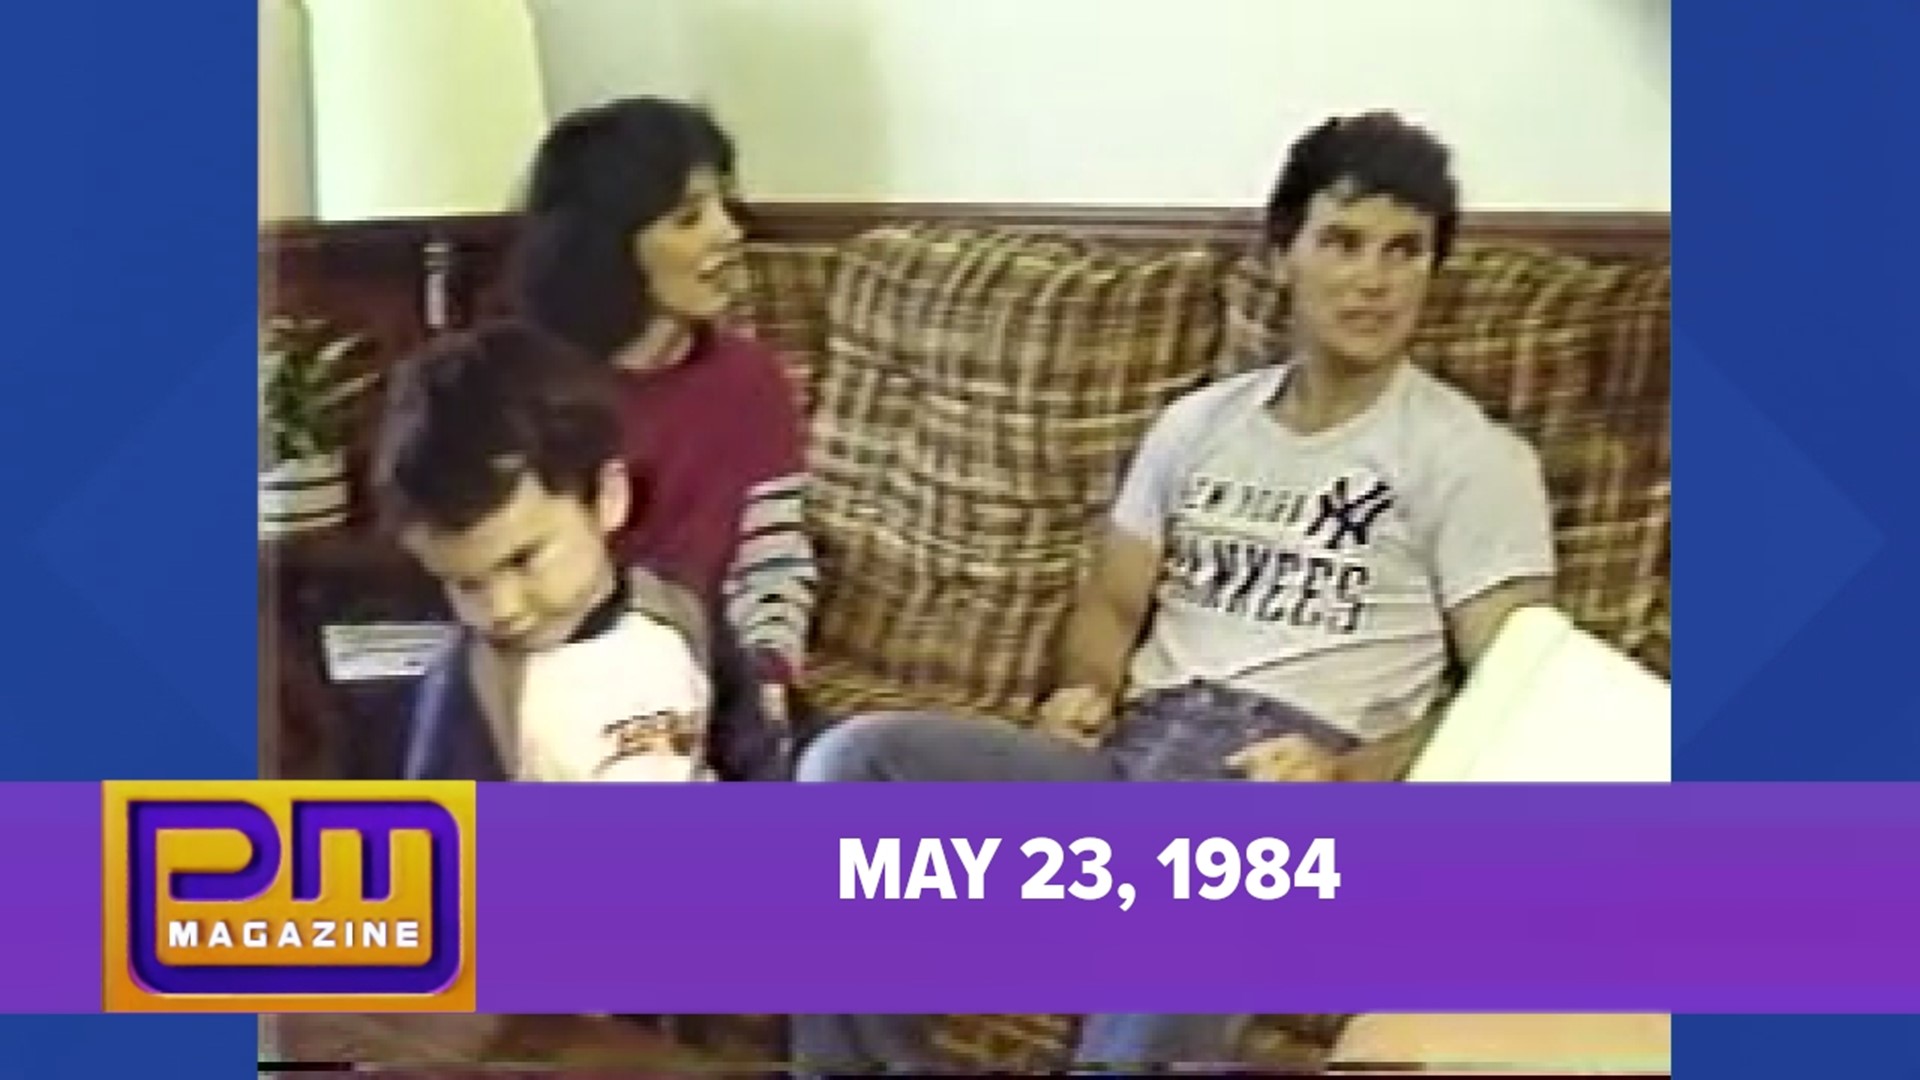 Watch PM Magazine with Jane Adonizio and Chad Booth, which aired on May 23, 1984. Sports anchor Joe Zone is profiled.